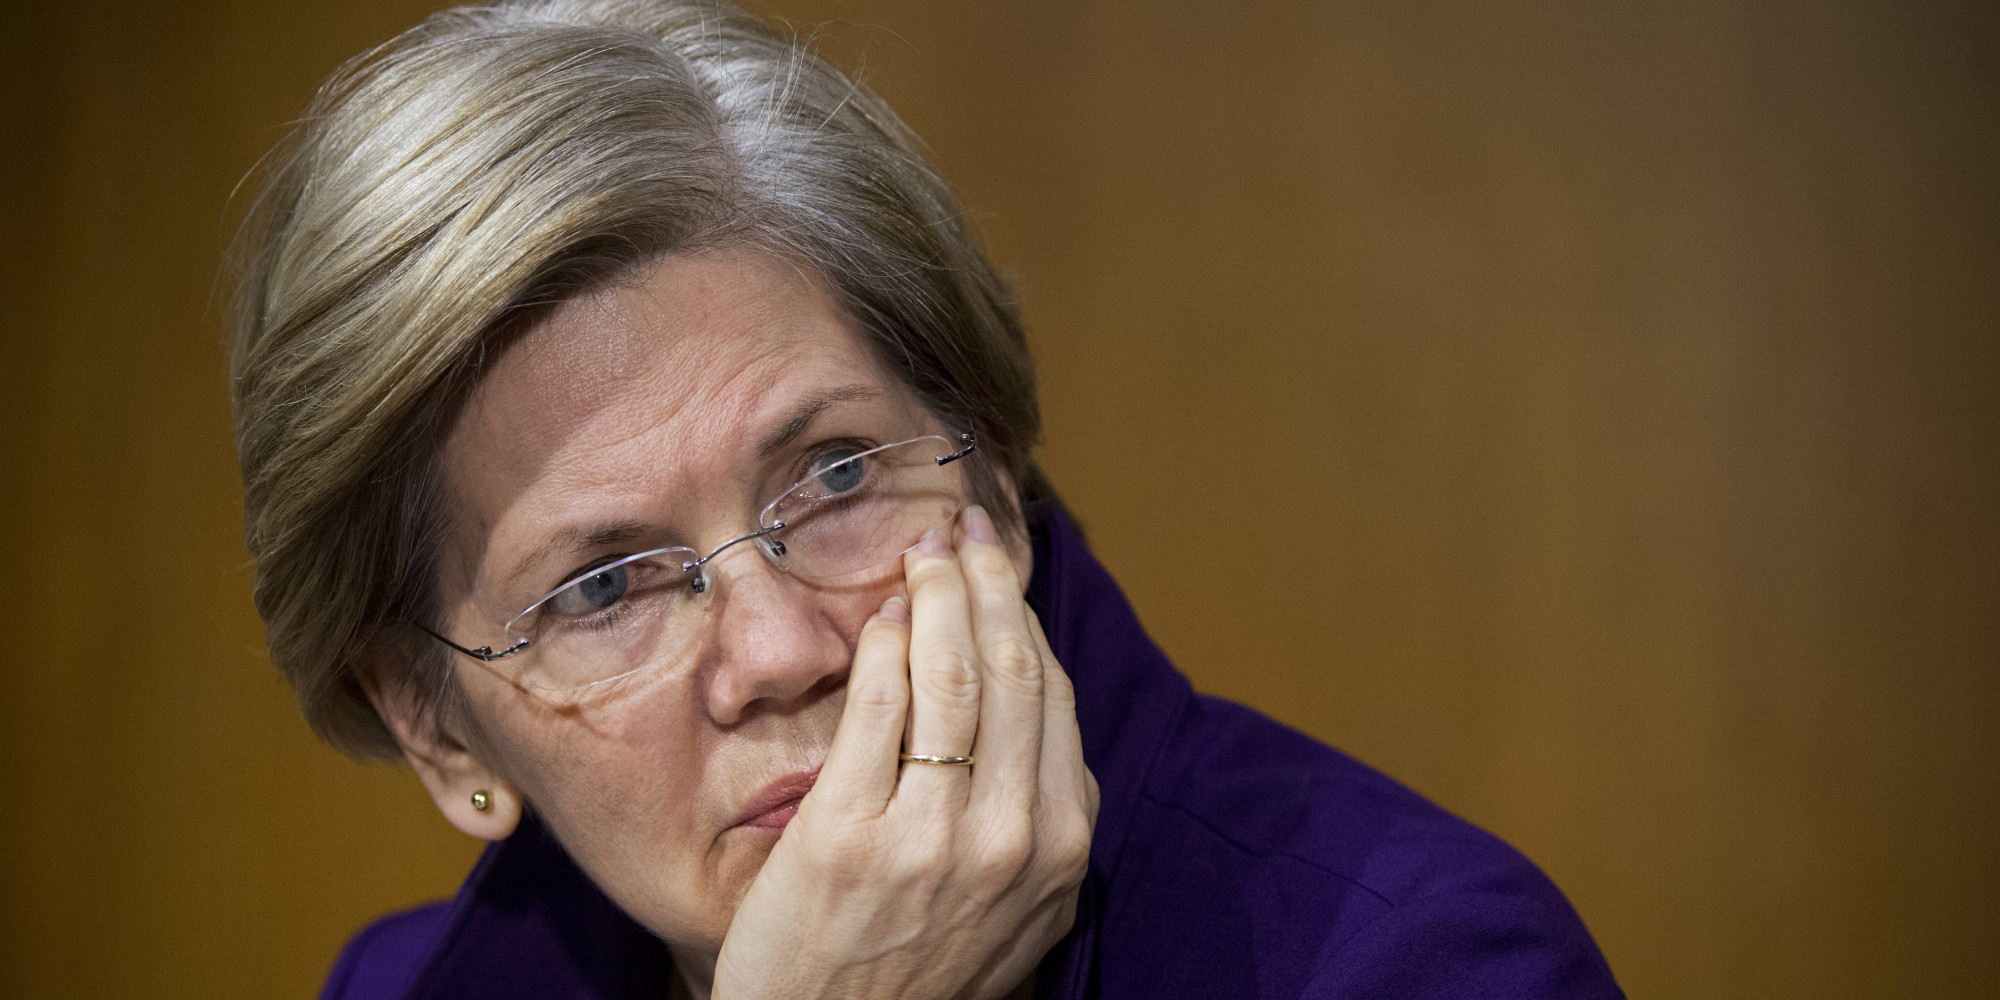 Sen. Elizabeth Warren (D-MA) has admitted that her attempt to win the 2020 Democratic Party nomination for president is “falling short” when it comes to fundraising